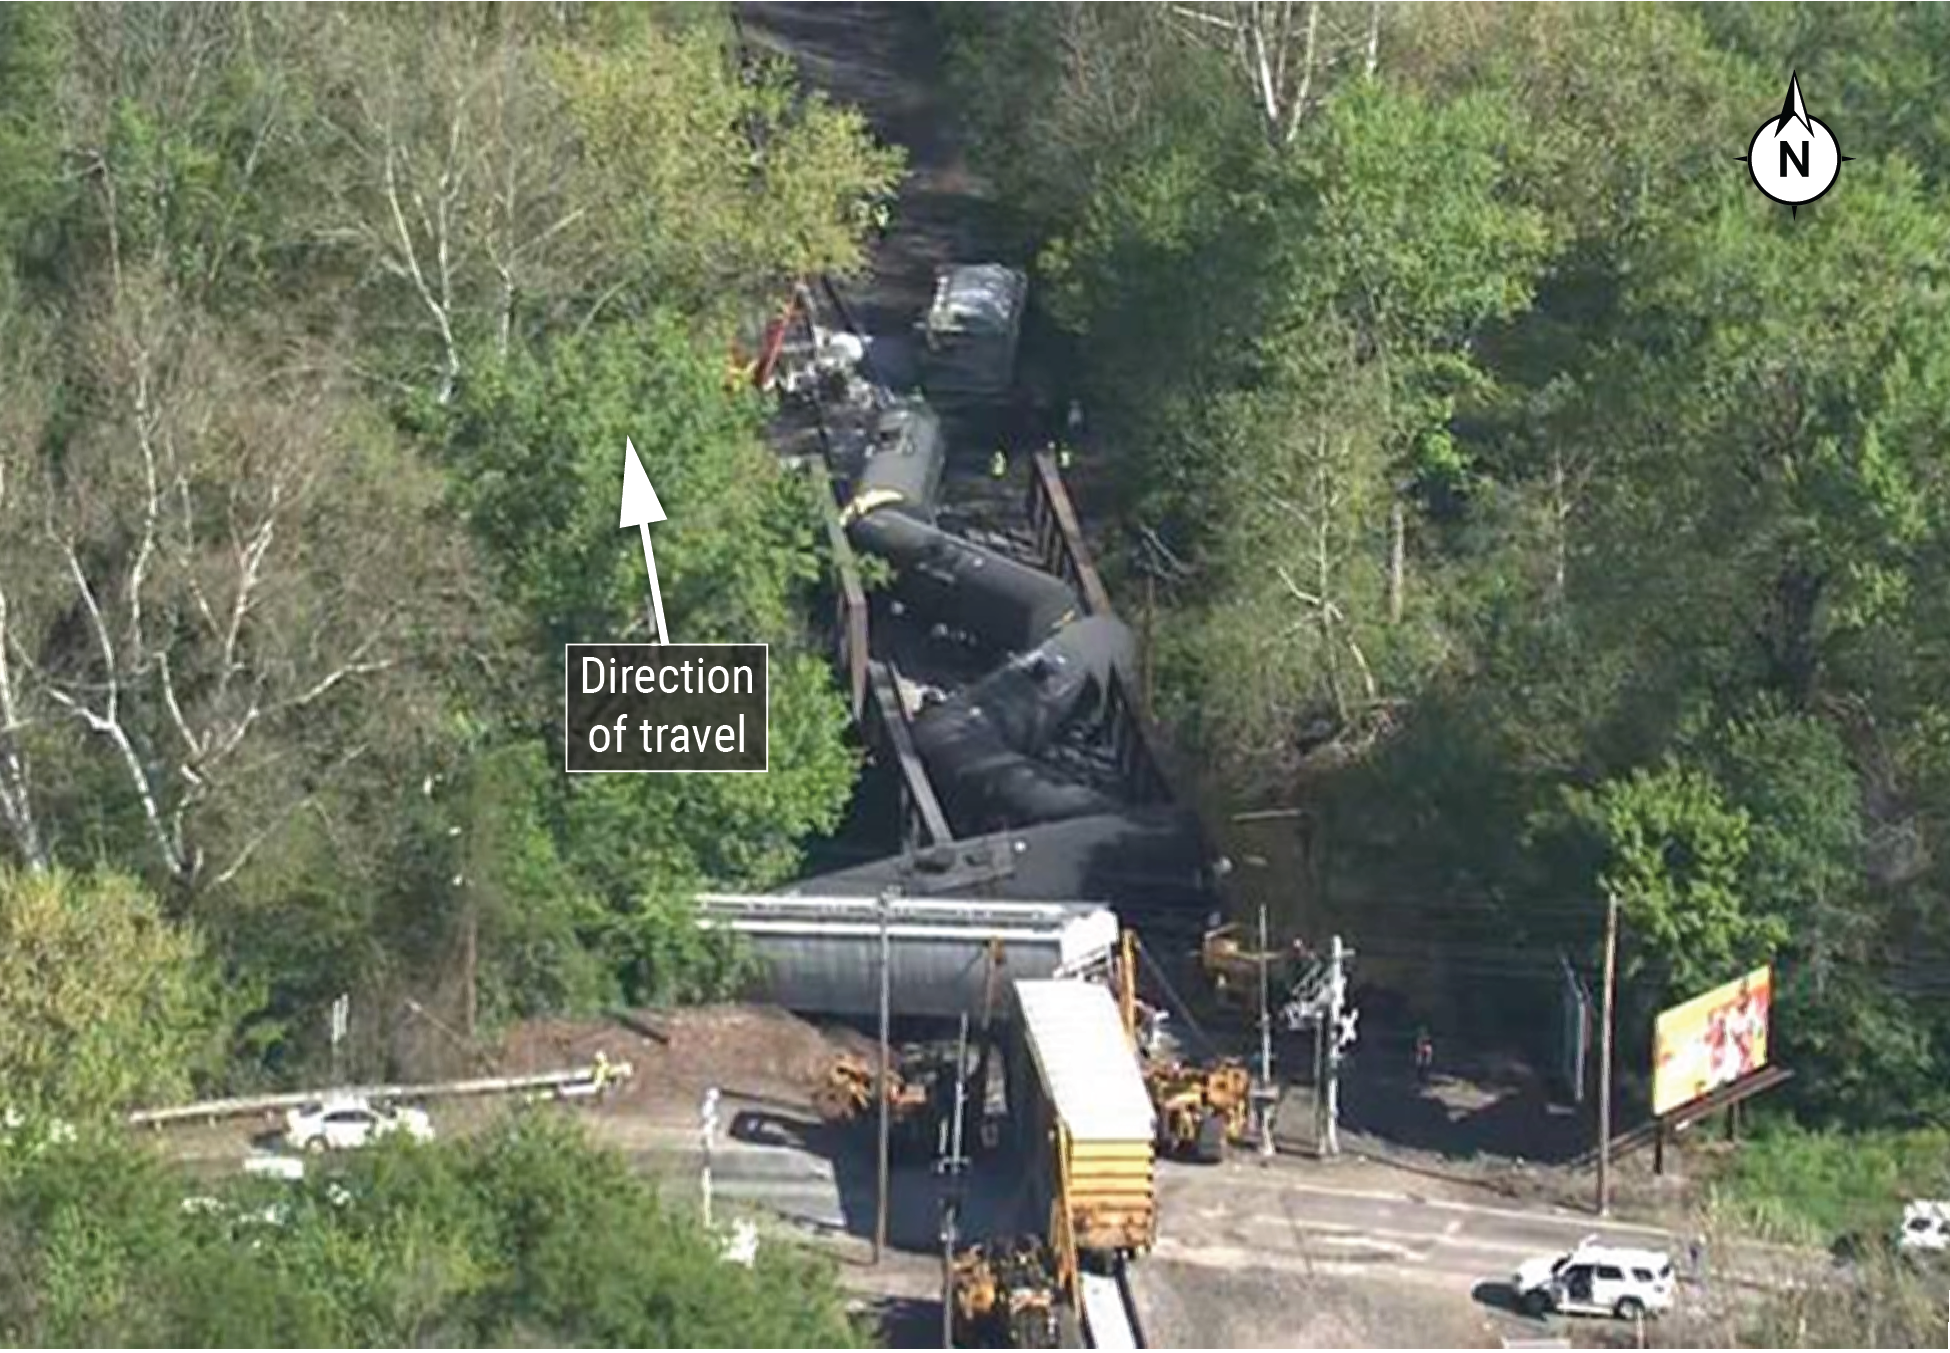 Figure 1. Aerial photograph of derailment site. (Source: WPXI Pittsburgh.)